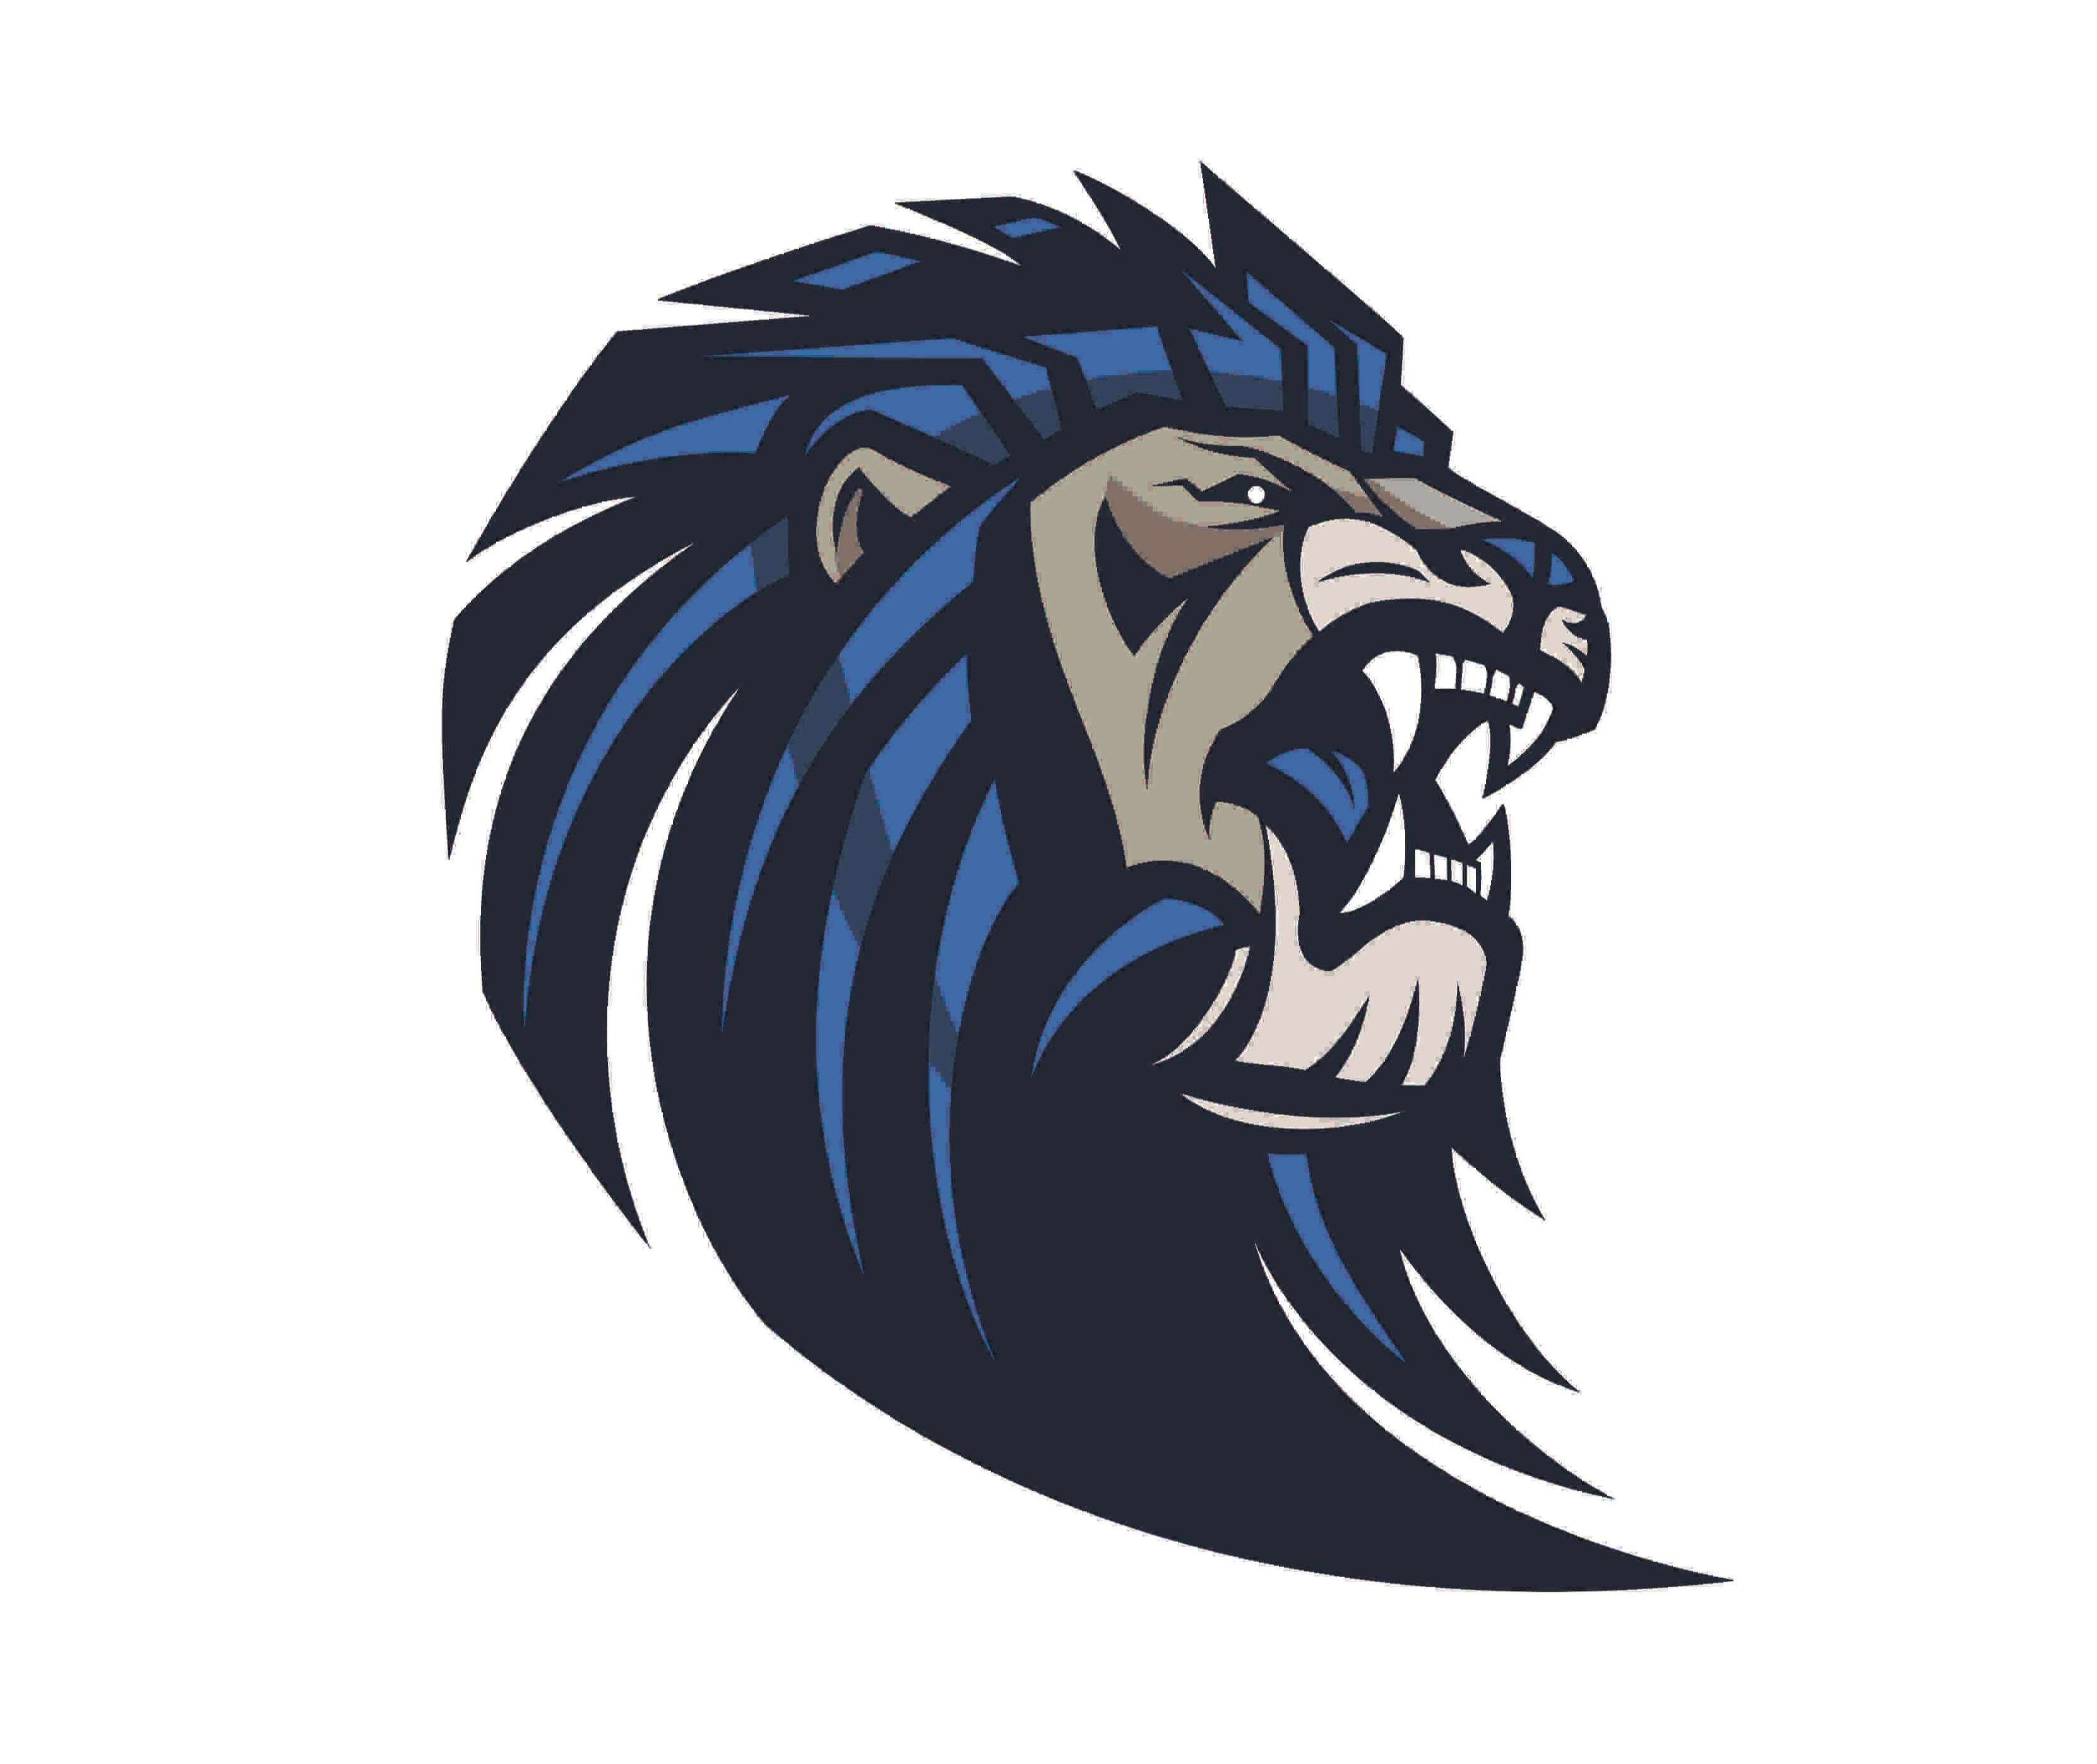 Different variations of the school's logo. White background with blue, black, grey and white lion.